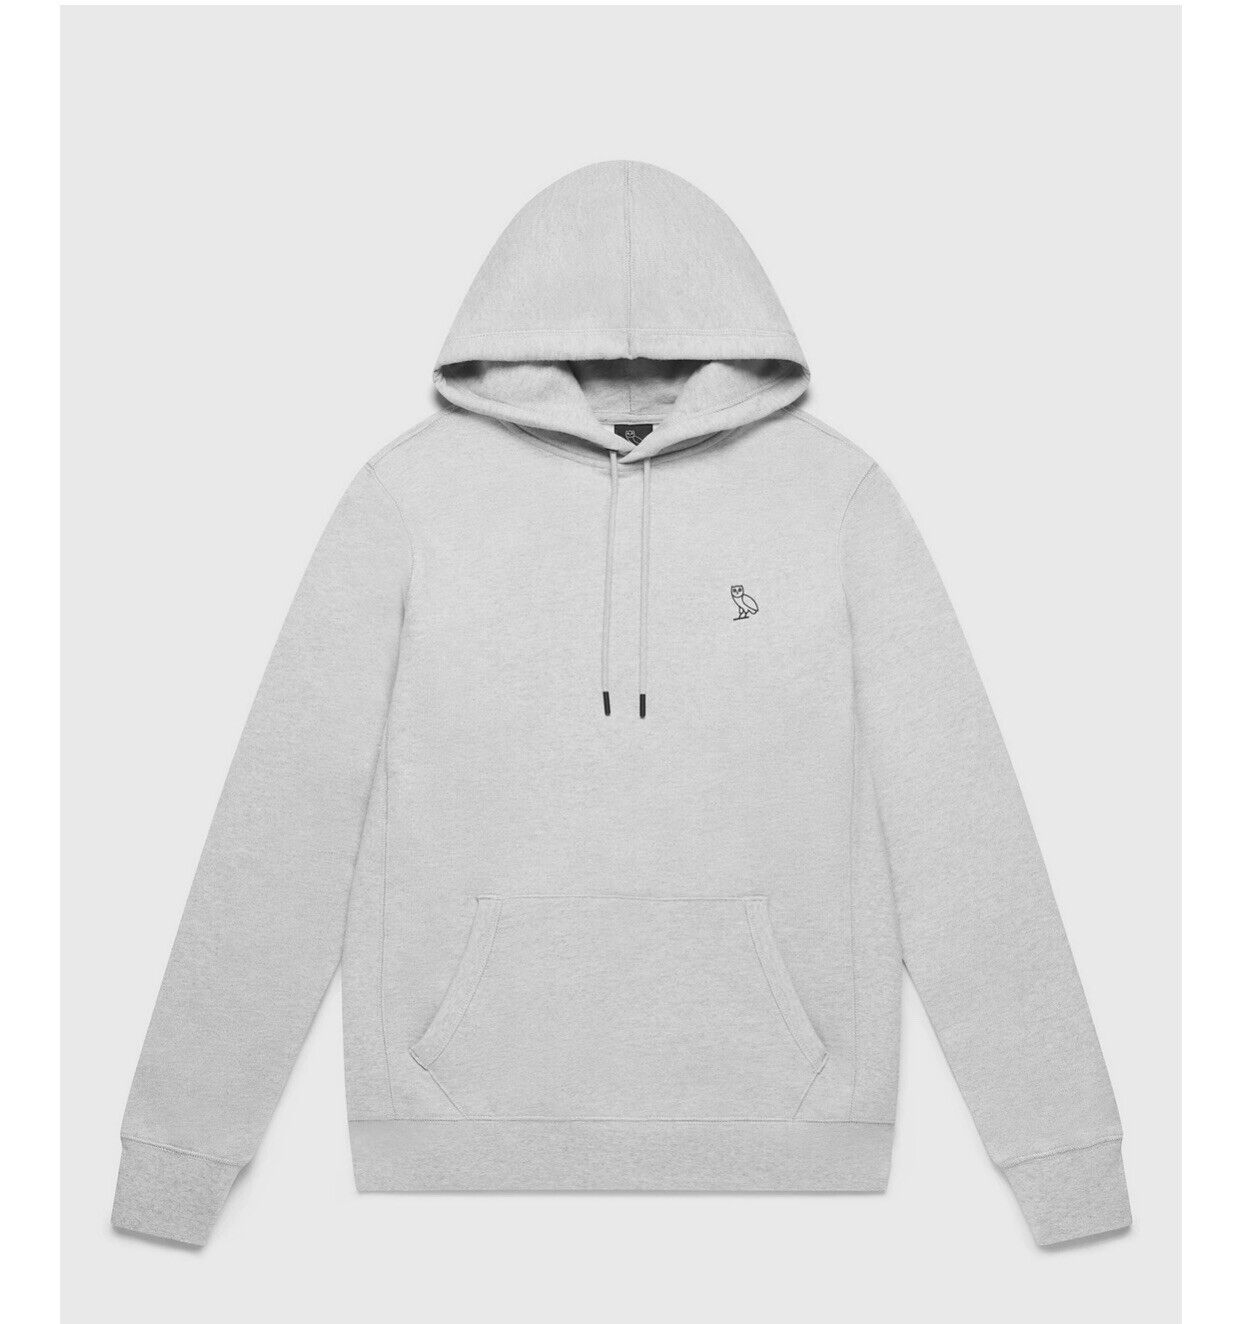 OVO Hoodie Heather Grey BE-KT-002-HG Men's Large 🔥🔥🇺🇸